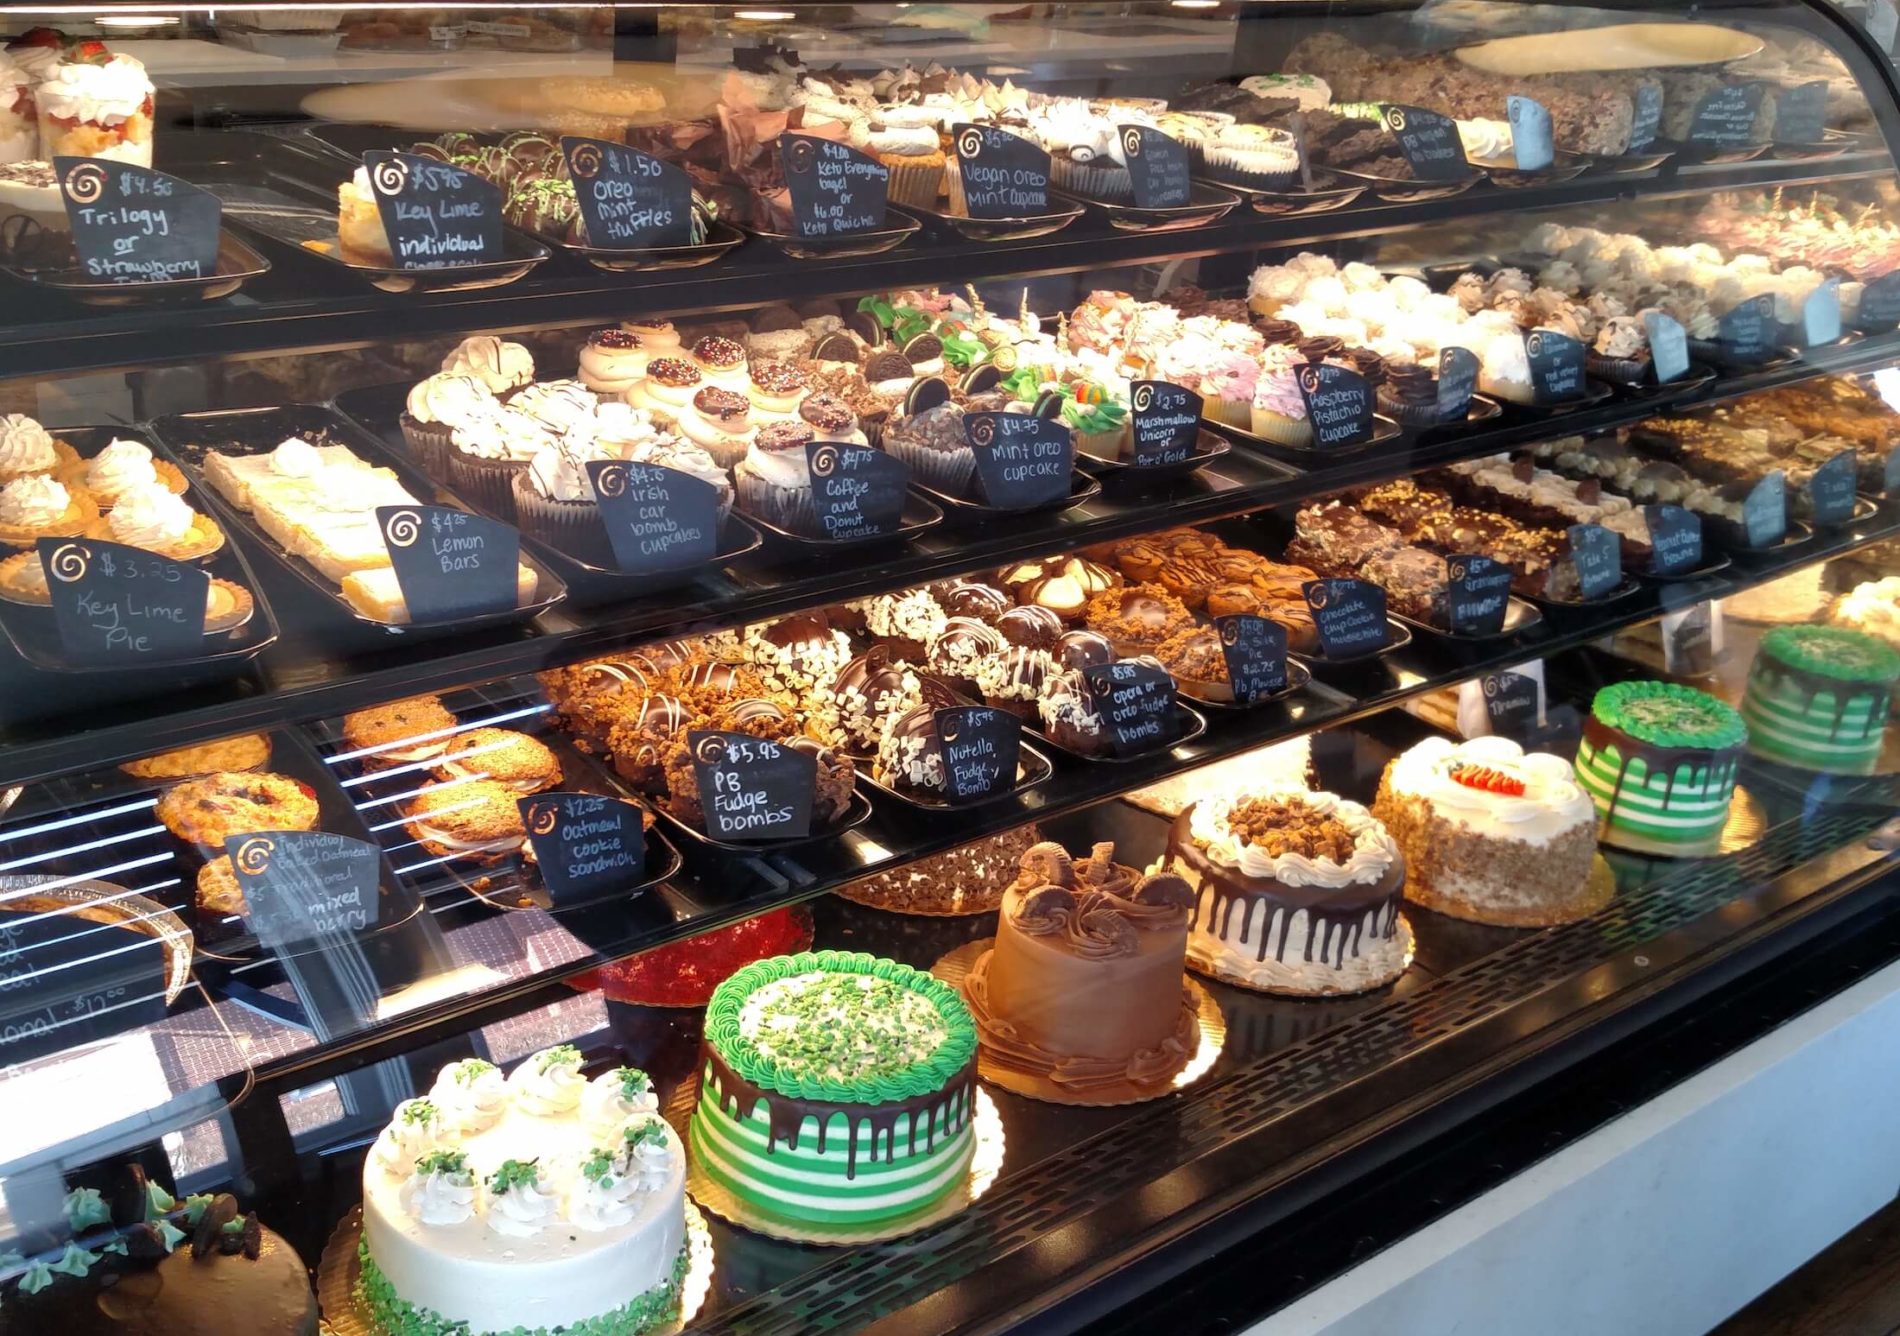 Glass display case with shelves of decadent desserts